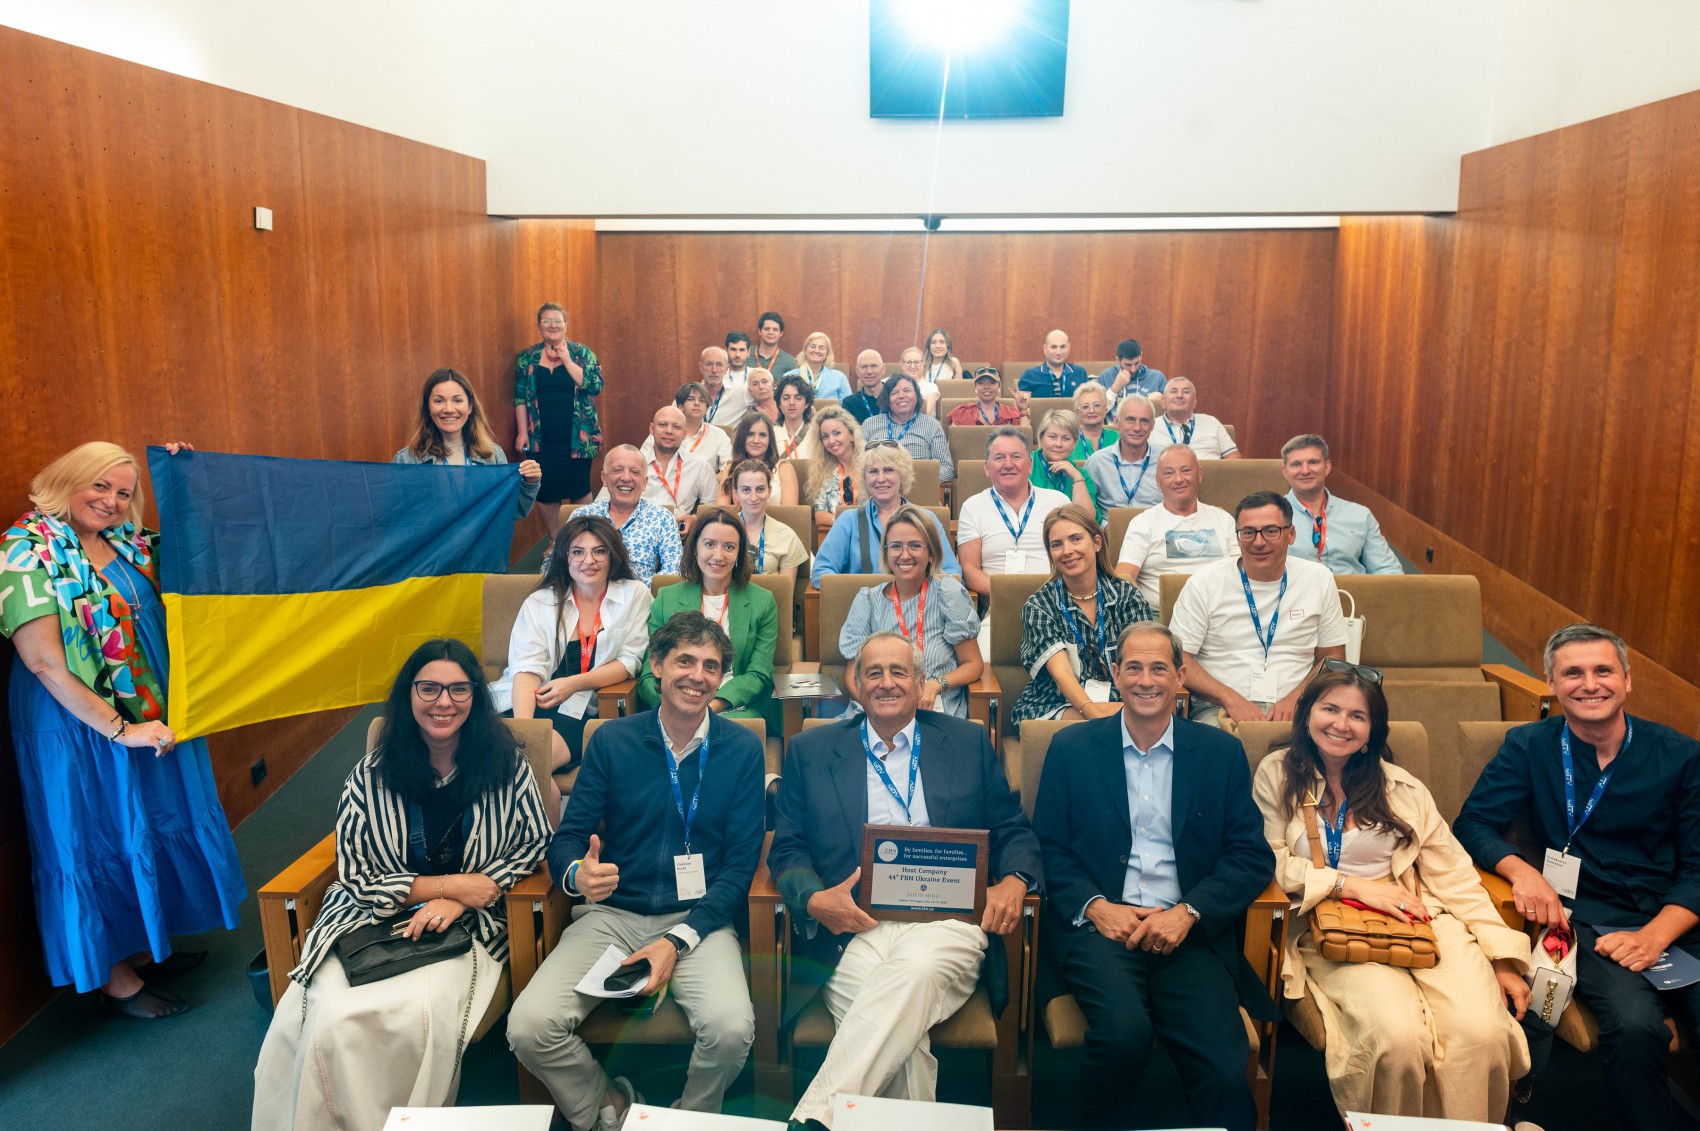 The 44th FBN Ukraine event took place on July 12-15 in Lisbon